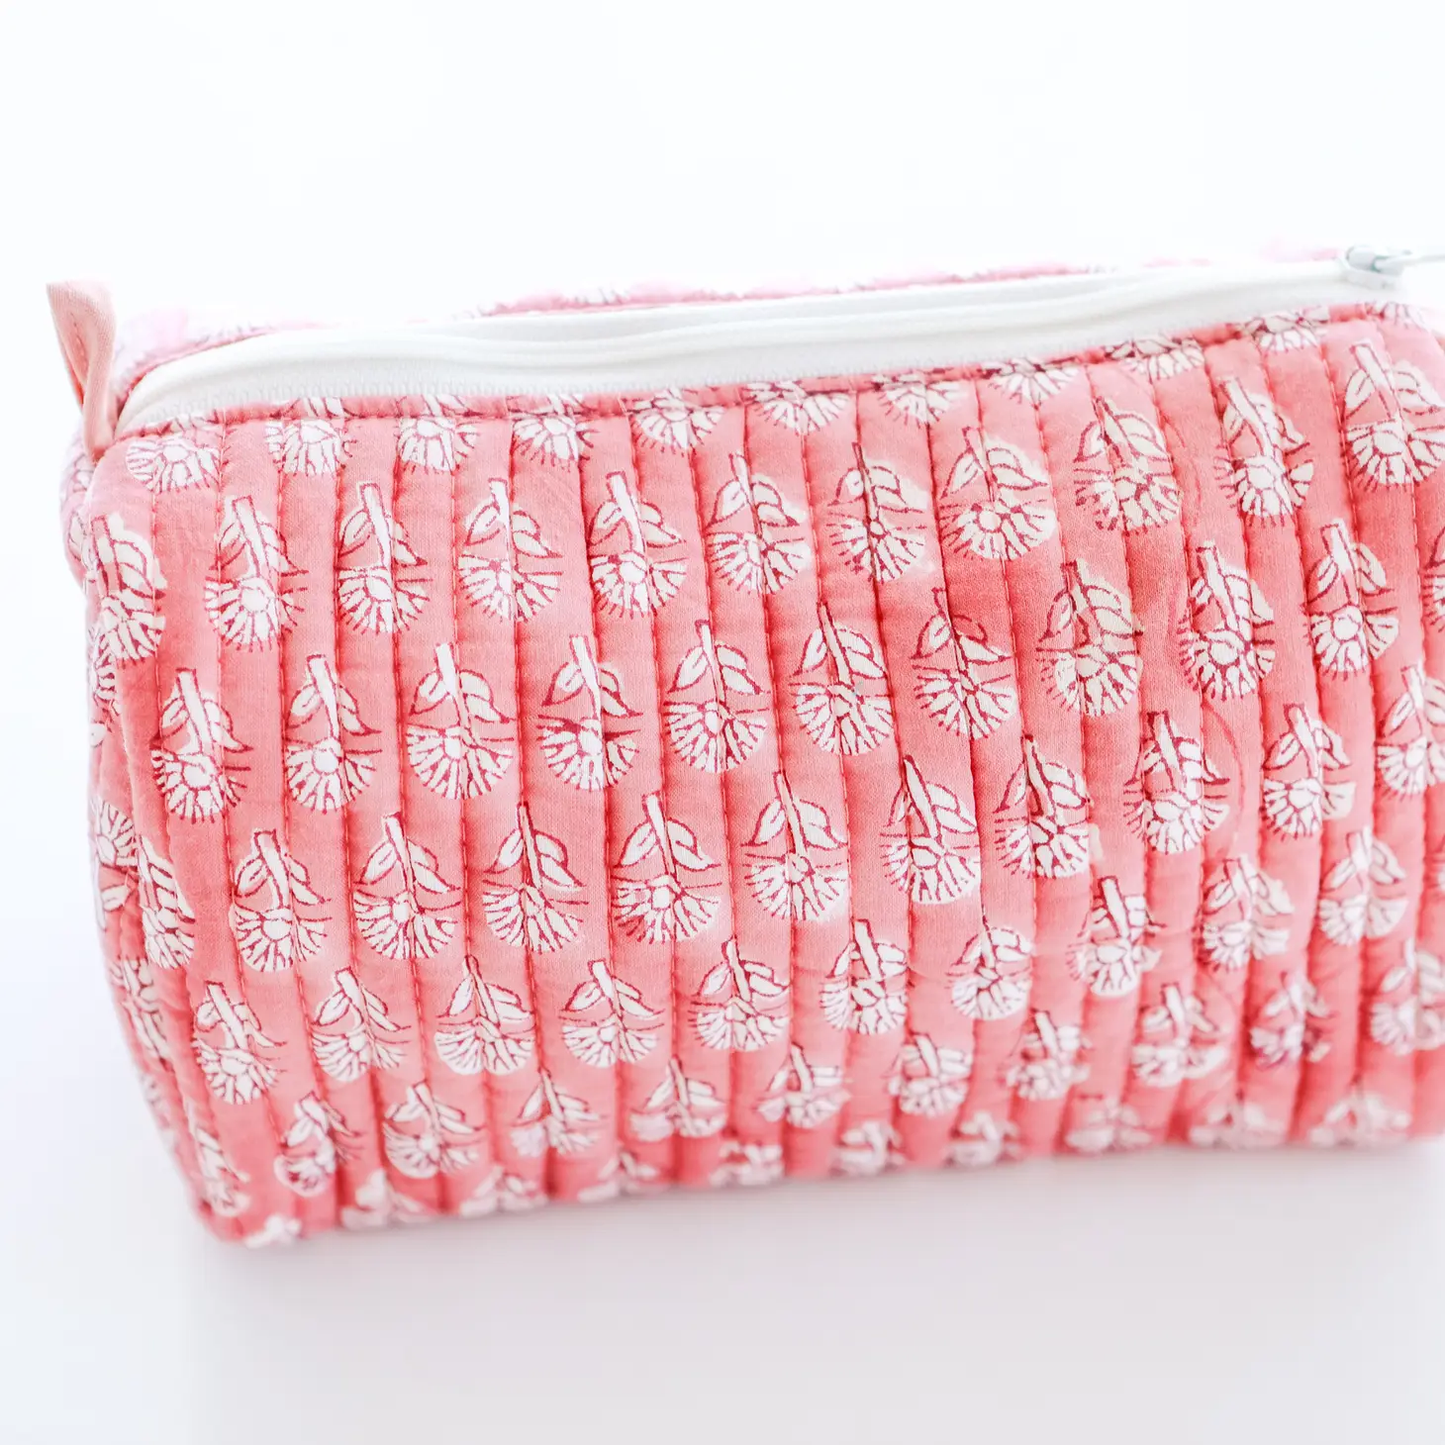 Floral Print Pouch in Dusty Pink